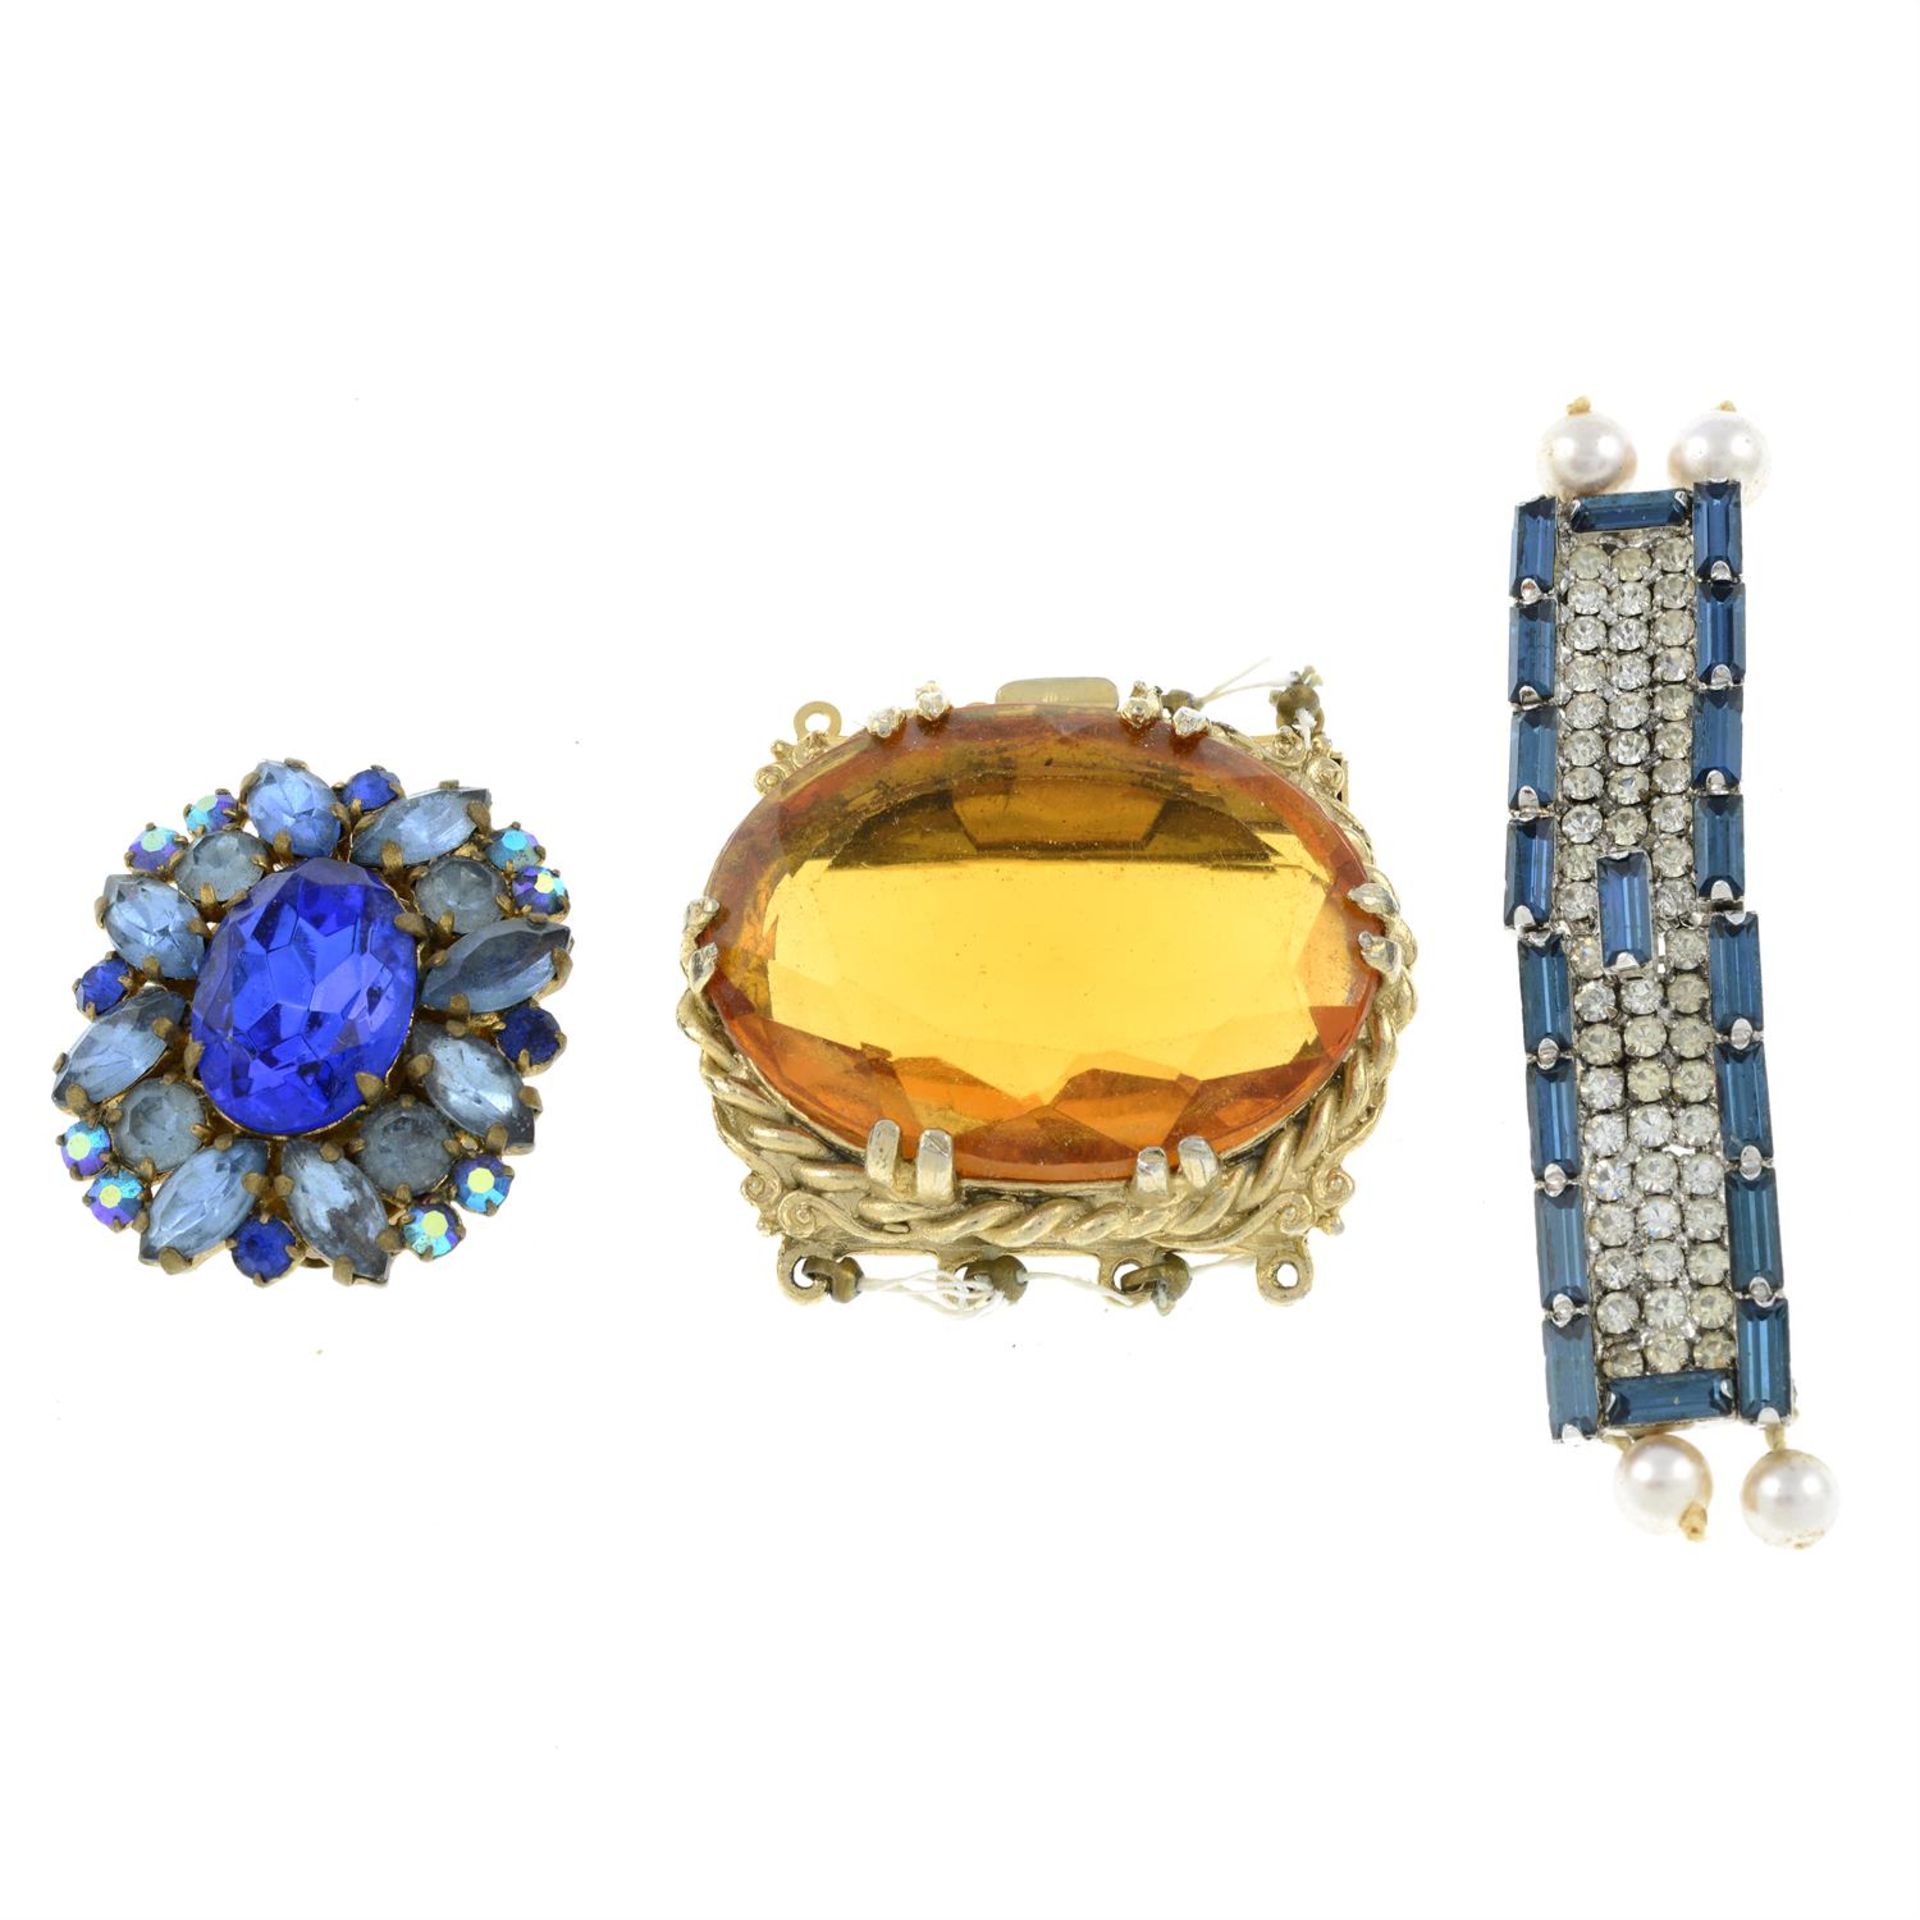 A selection of jewellery components and gemstones. Some AF.